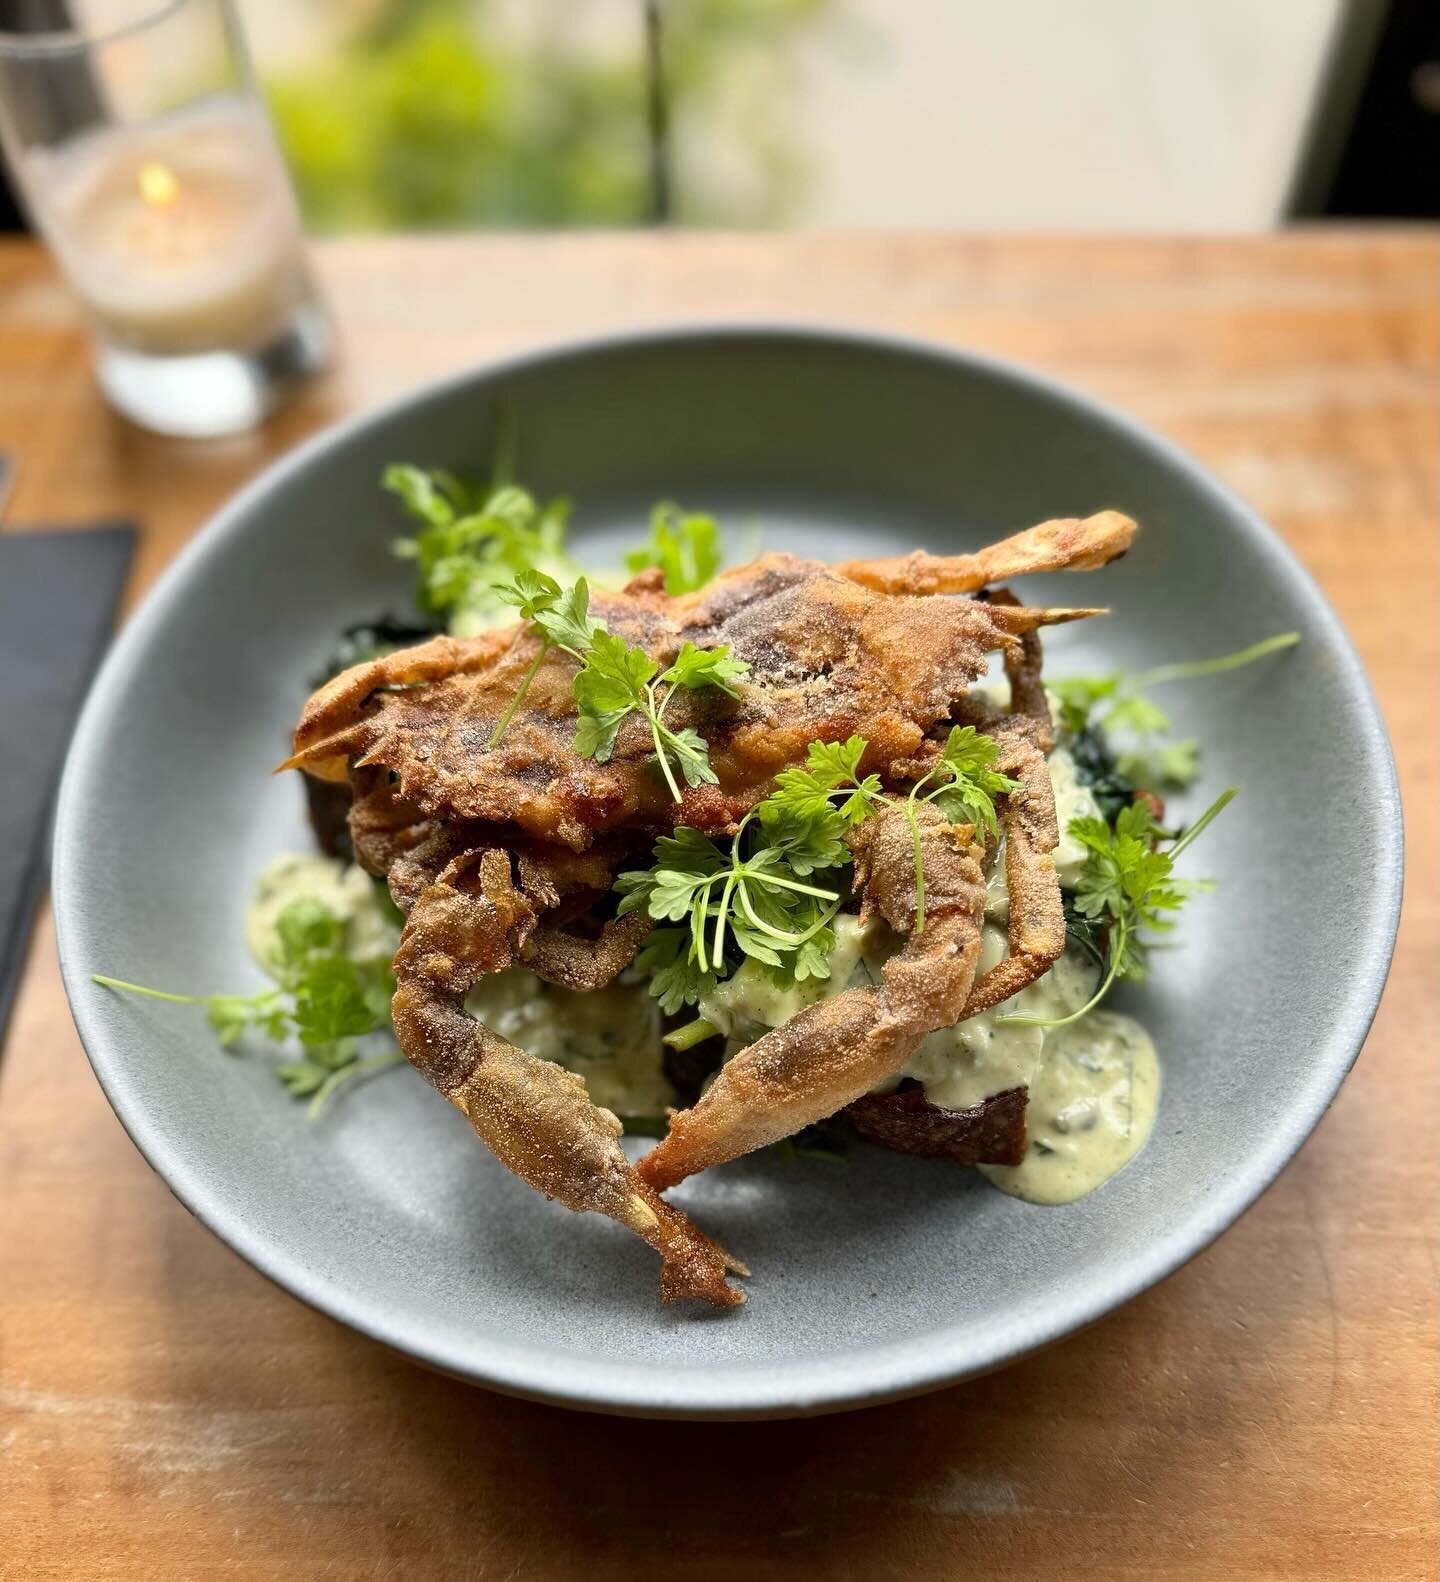 This weekend for dinner we&rsquo;ll be serving soft shell crab over house made focaccia, with sauce gribiche and water spinach 🦀🥬 this special will only last for this weekend, so don&rsquo;t miss out!
.
.
.
.
.

#mamafox #cometomama #bedstuy #brook